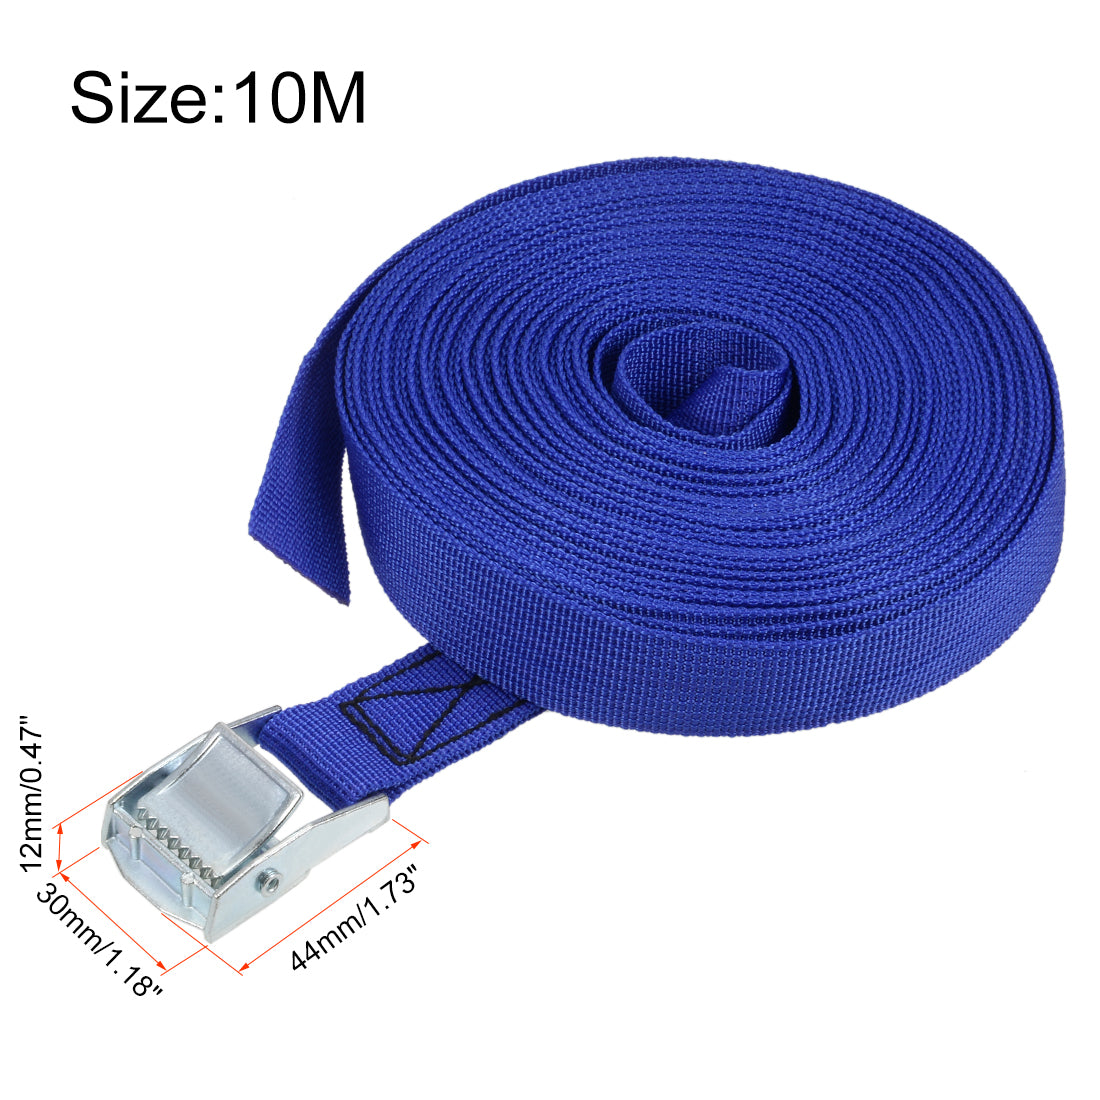 uxcell Uxcell 10M x 25mm Lashing Strap Cargo Tie Down Straps w Cam Lock Buckle 250Kg Work Load, Blue, 2Pcs